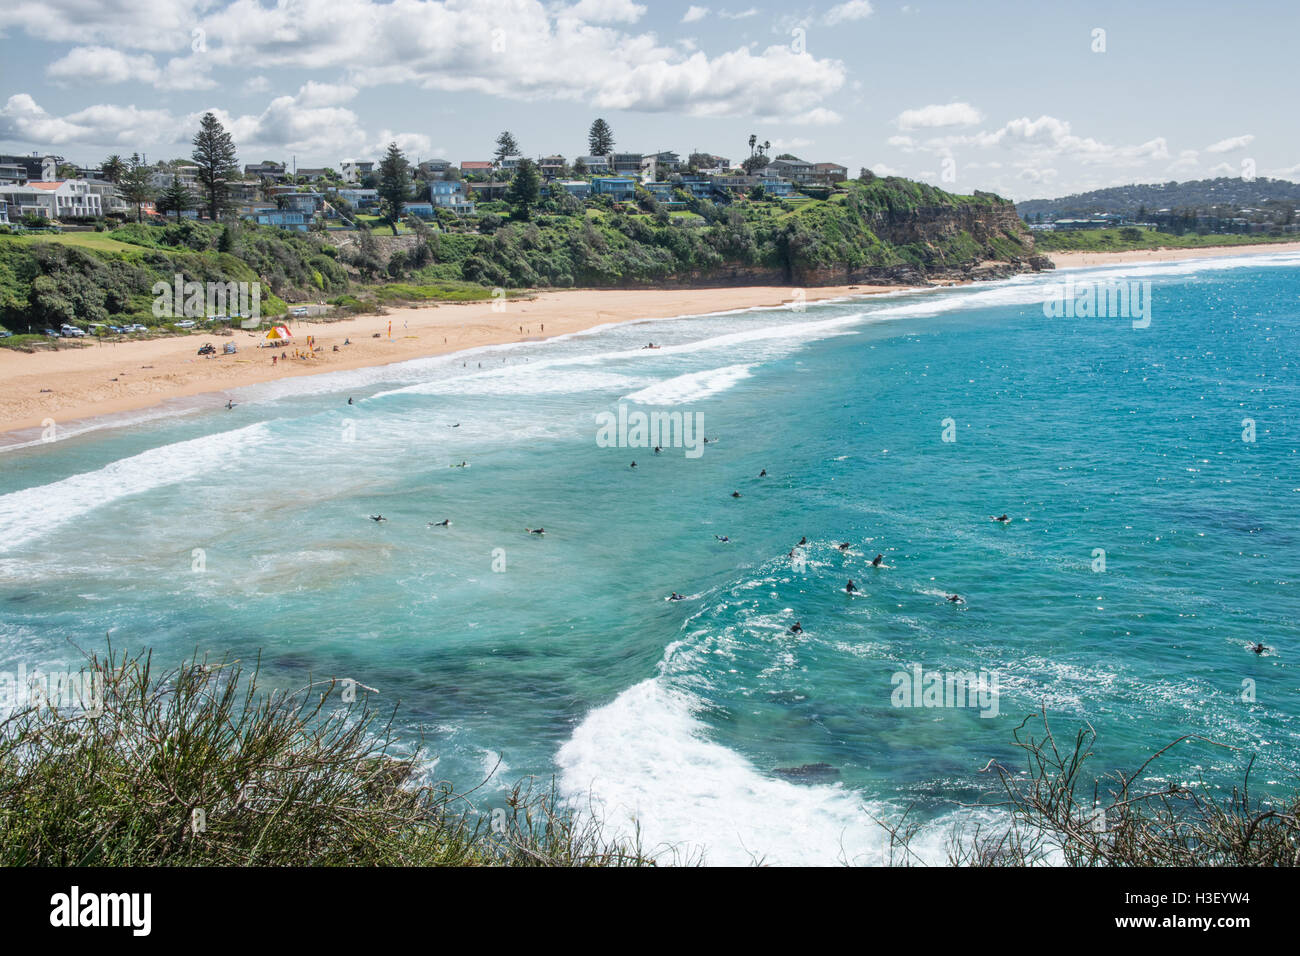 Looking down on Surfers at Warriewood Beach Sydney Australia Stock Photo